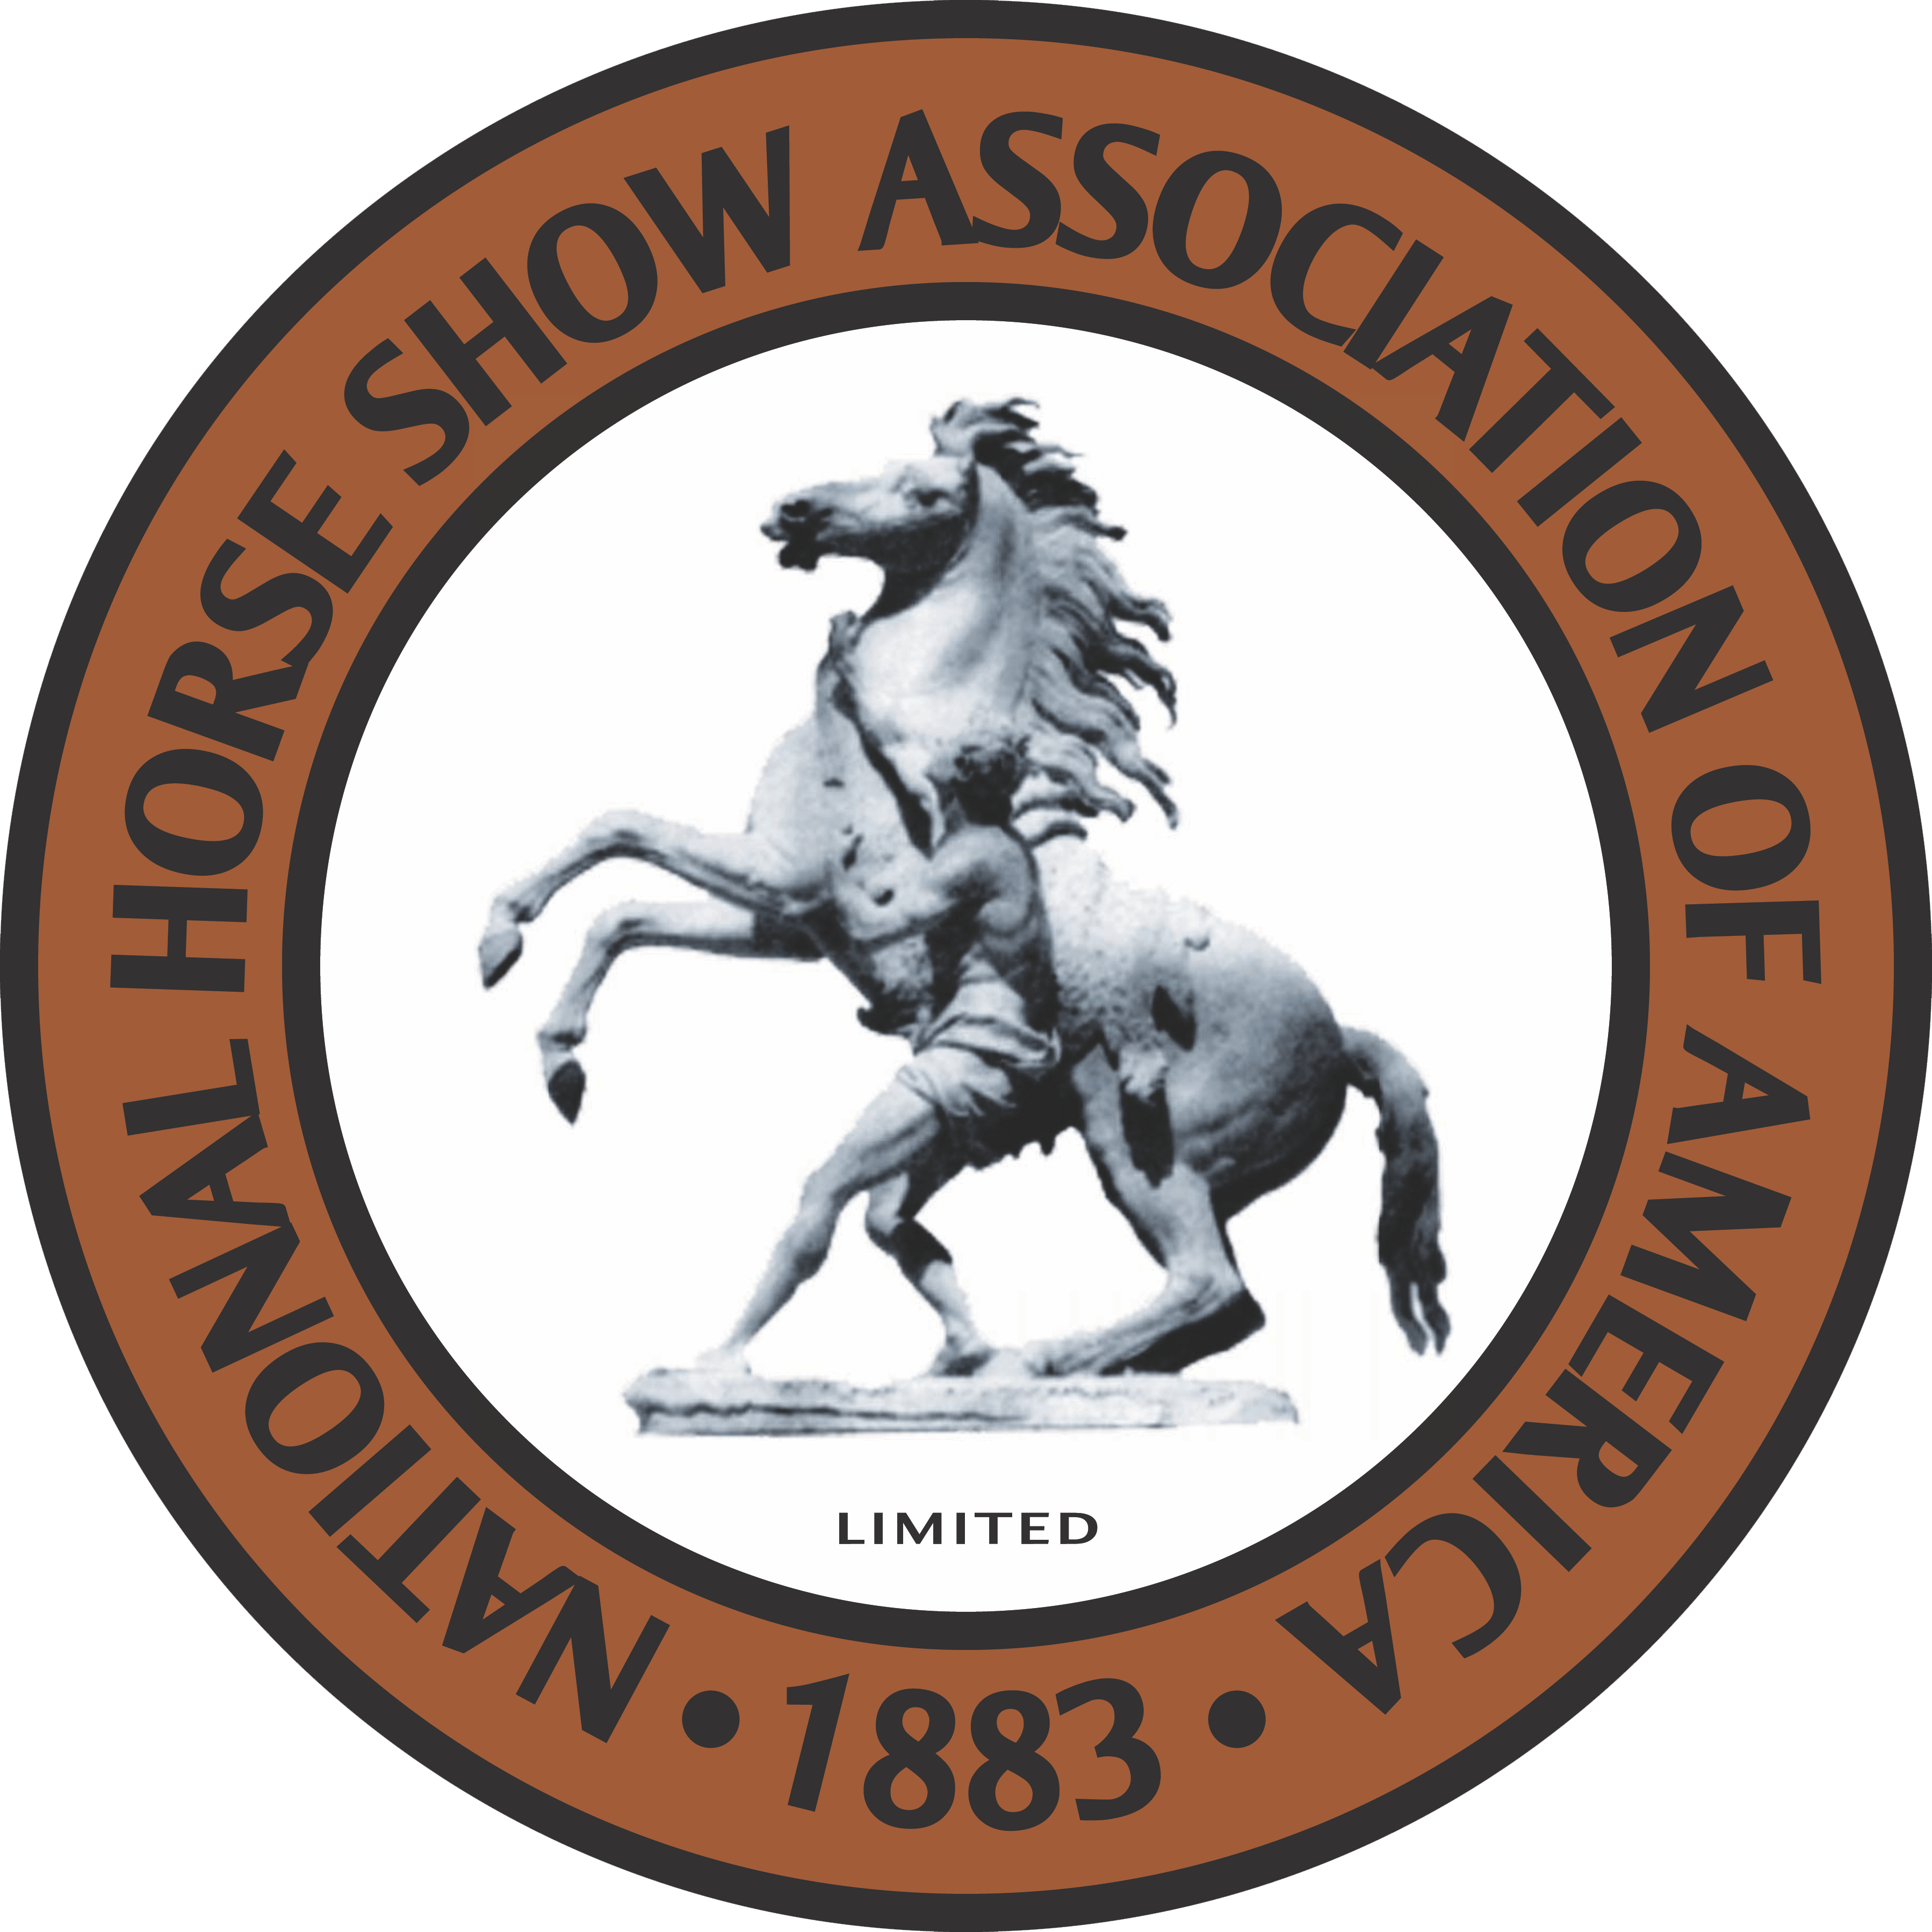 Horse Show Logo - The 2018 National Horse Show Announces Inaugural Equitation Weekend ...